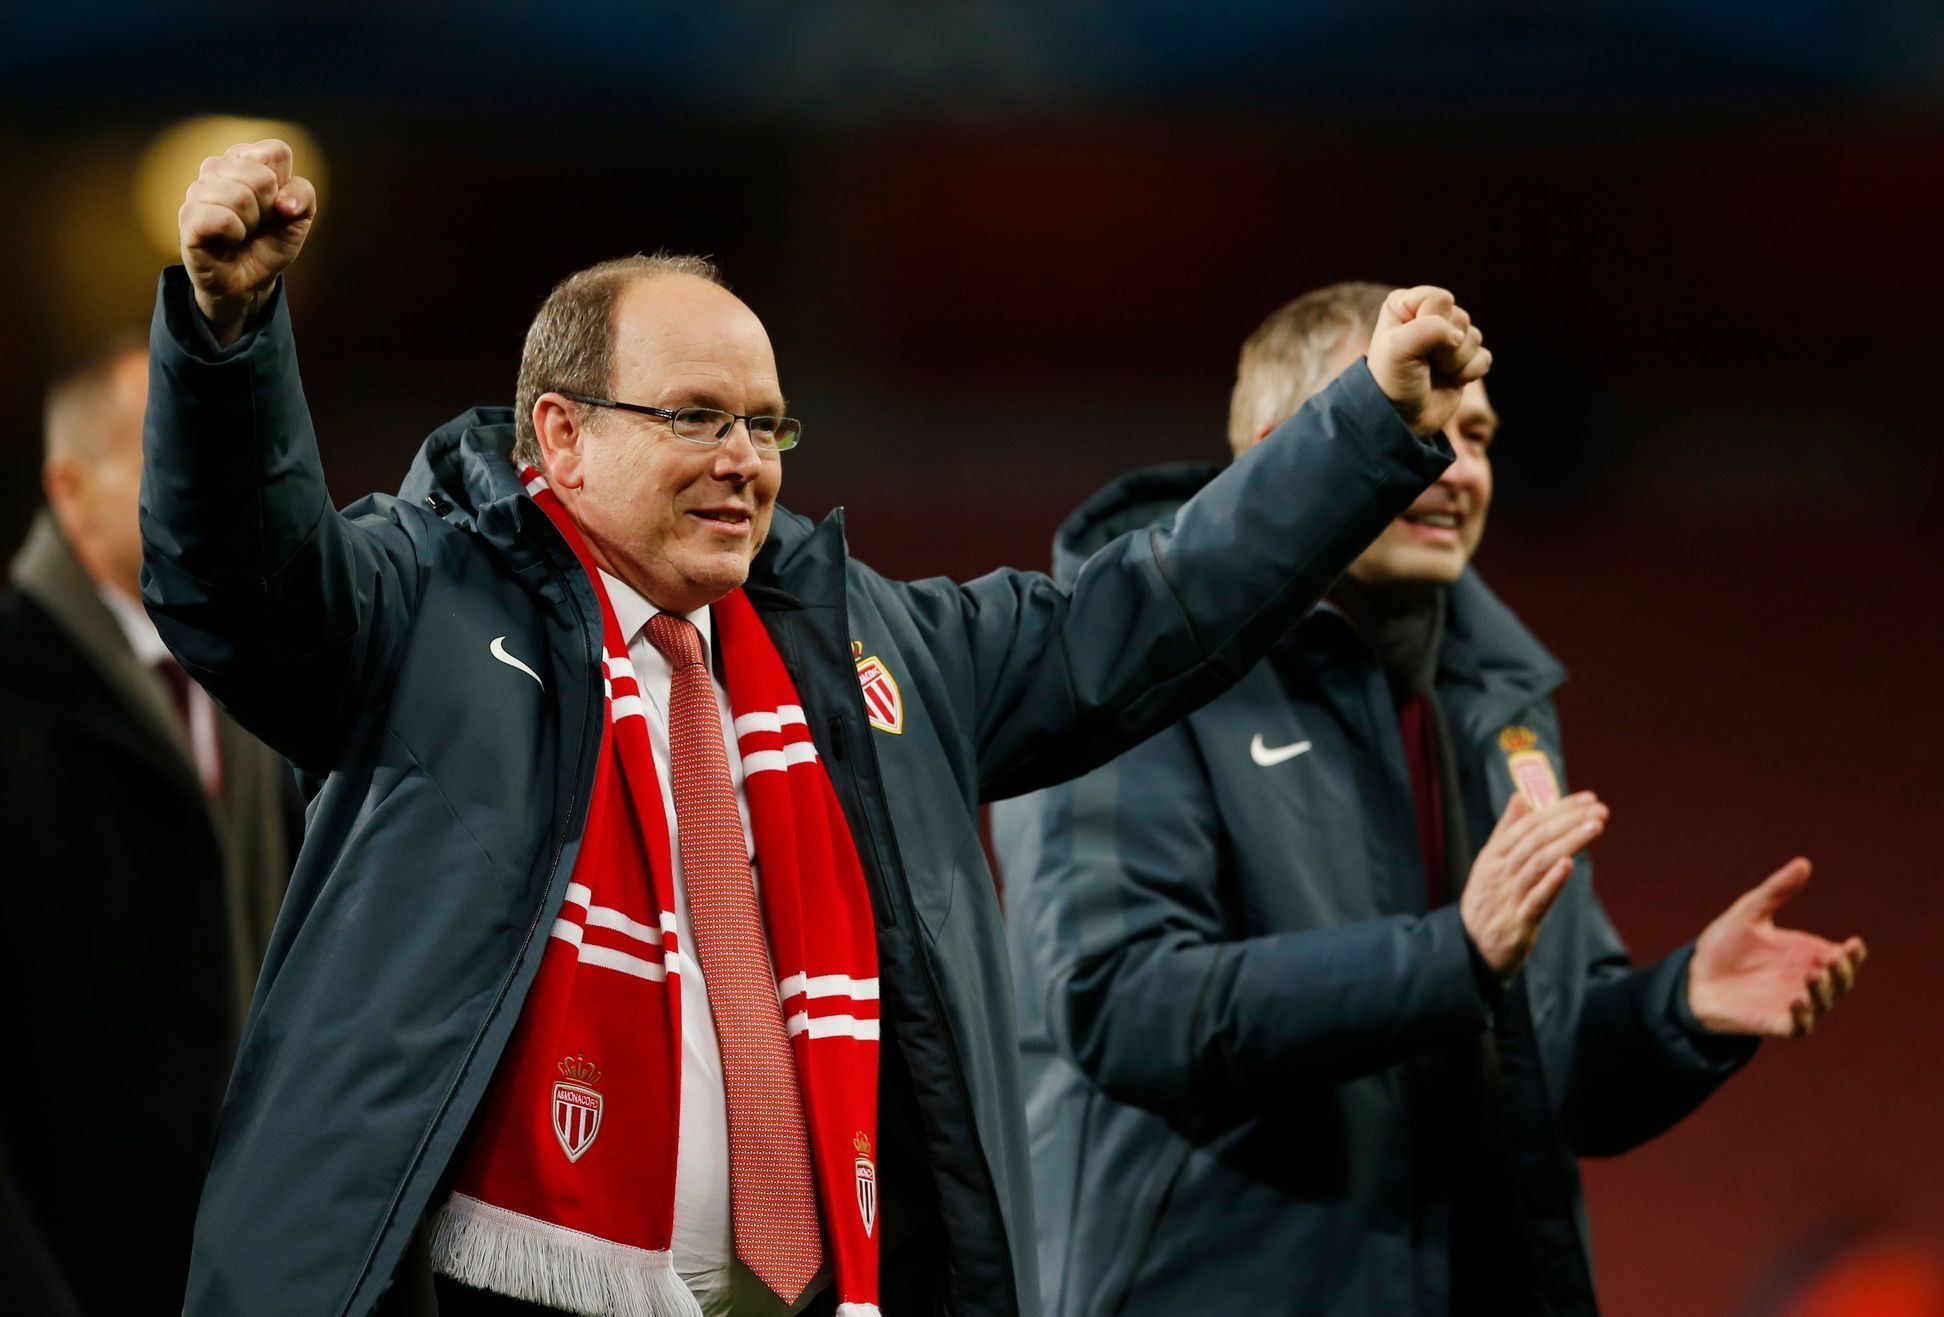 Football: Prince Albert of Monaco celebrates at the end of the match